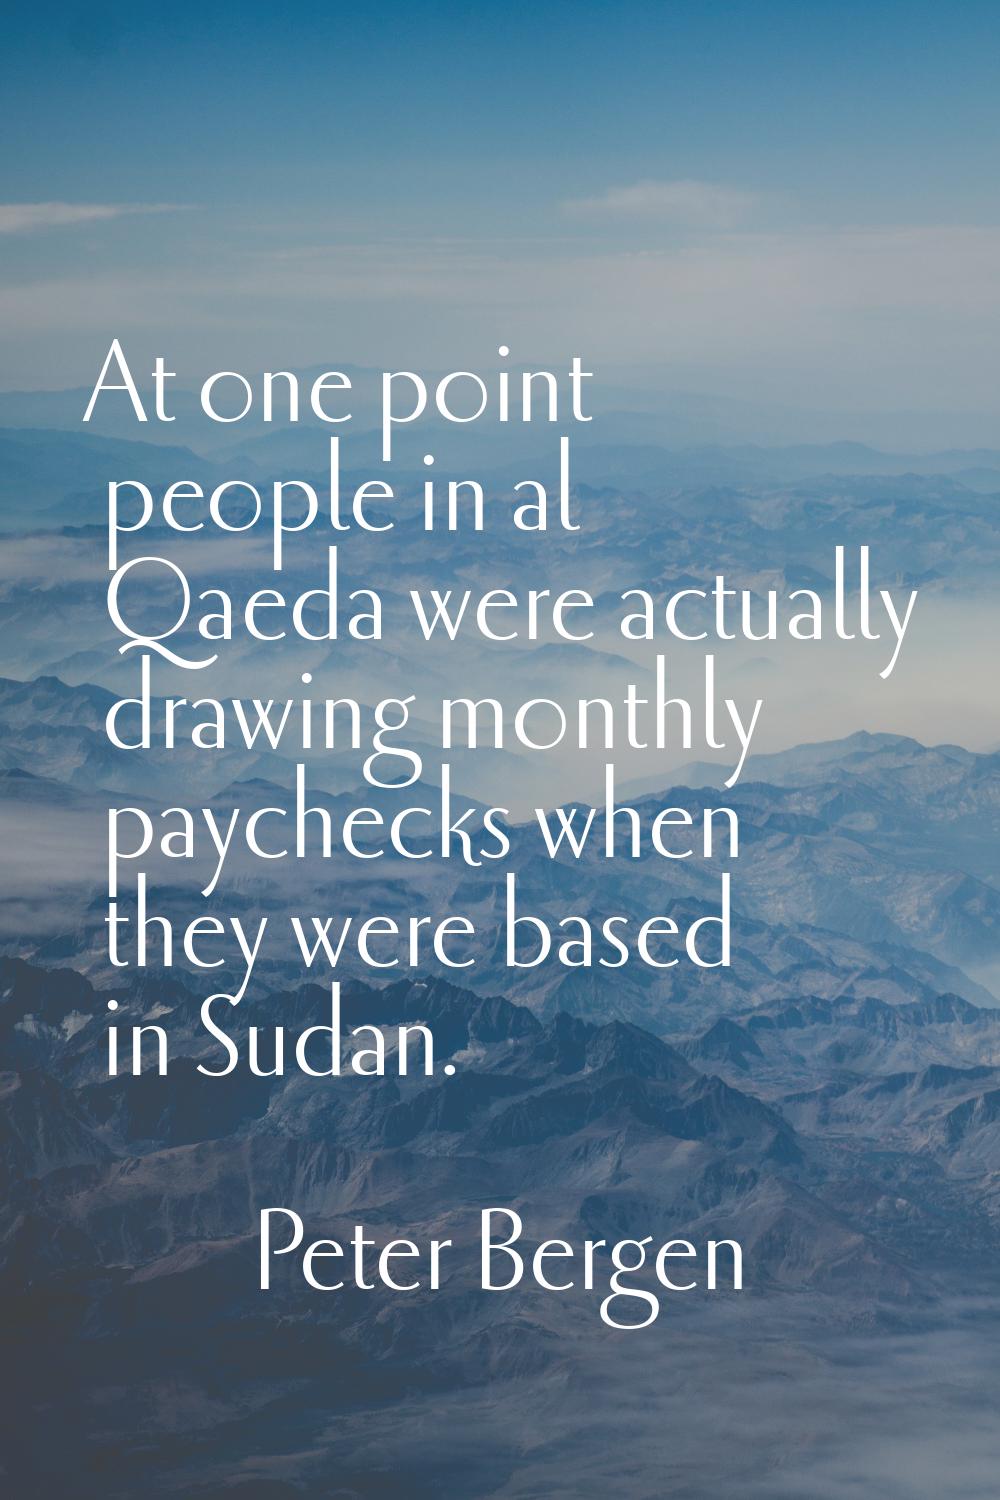 At one point people in al Qaeda were actually drawing monthly paychecks when they were based in Sud